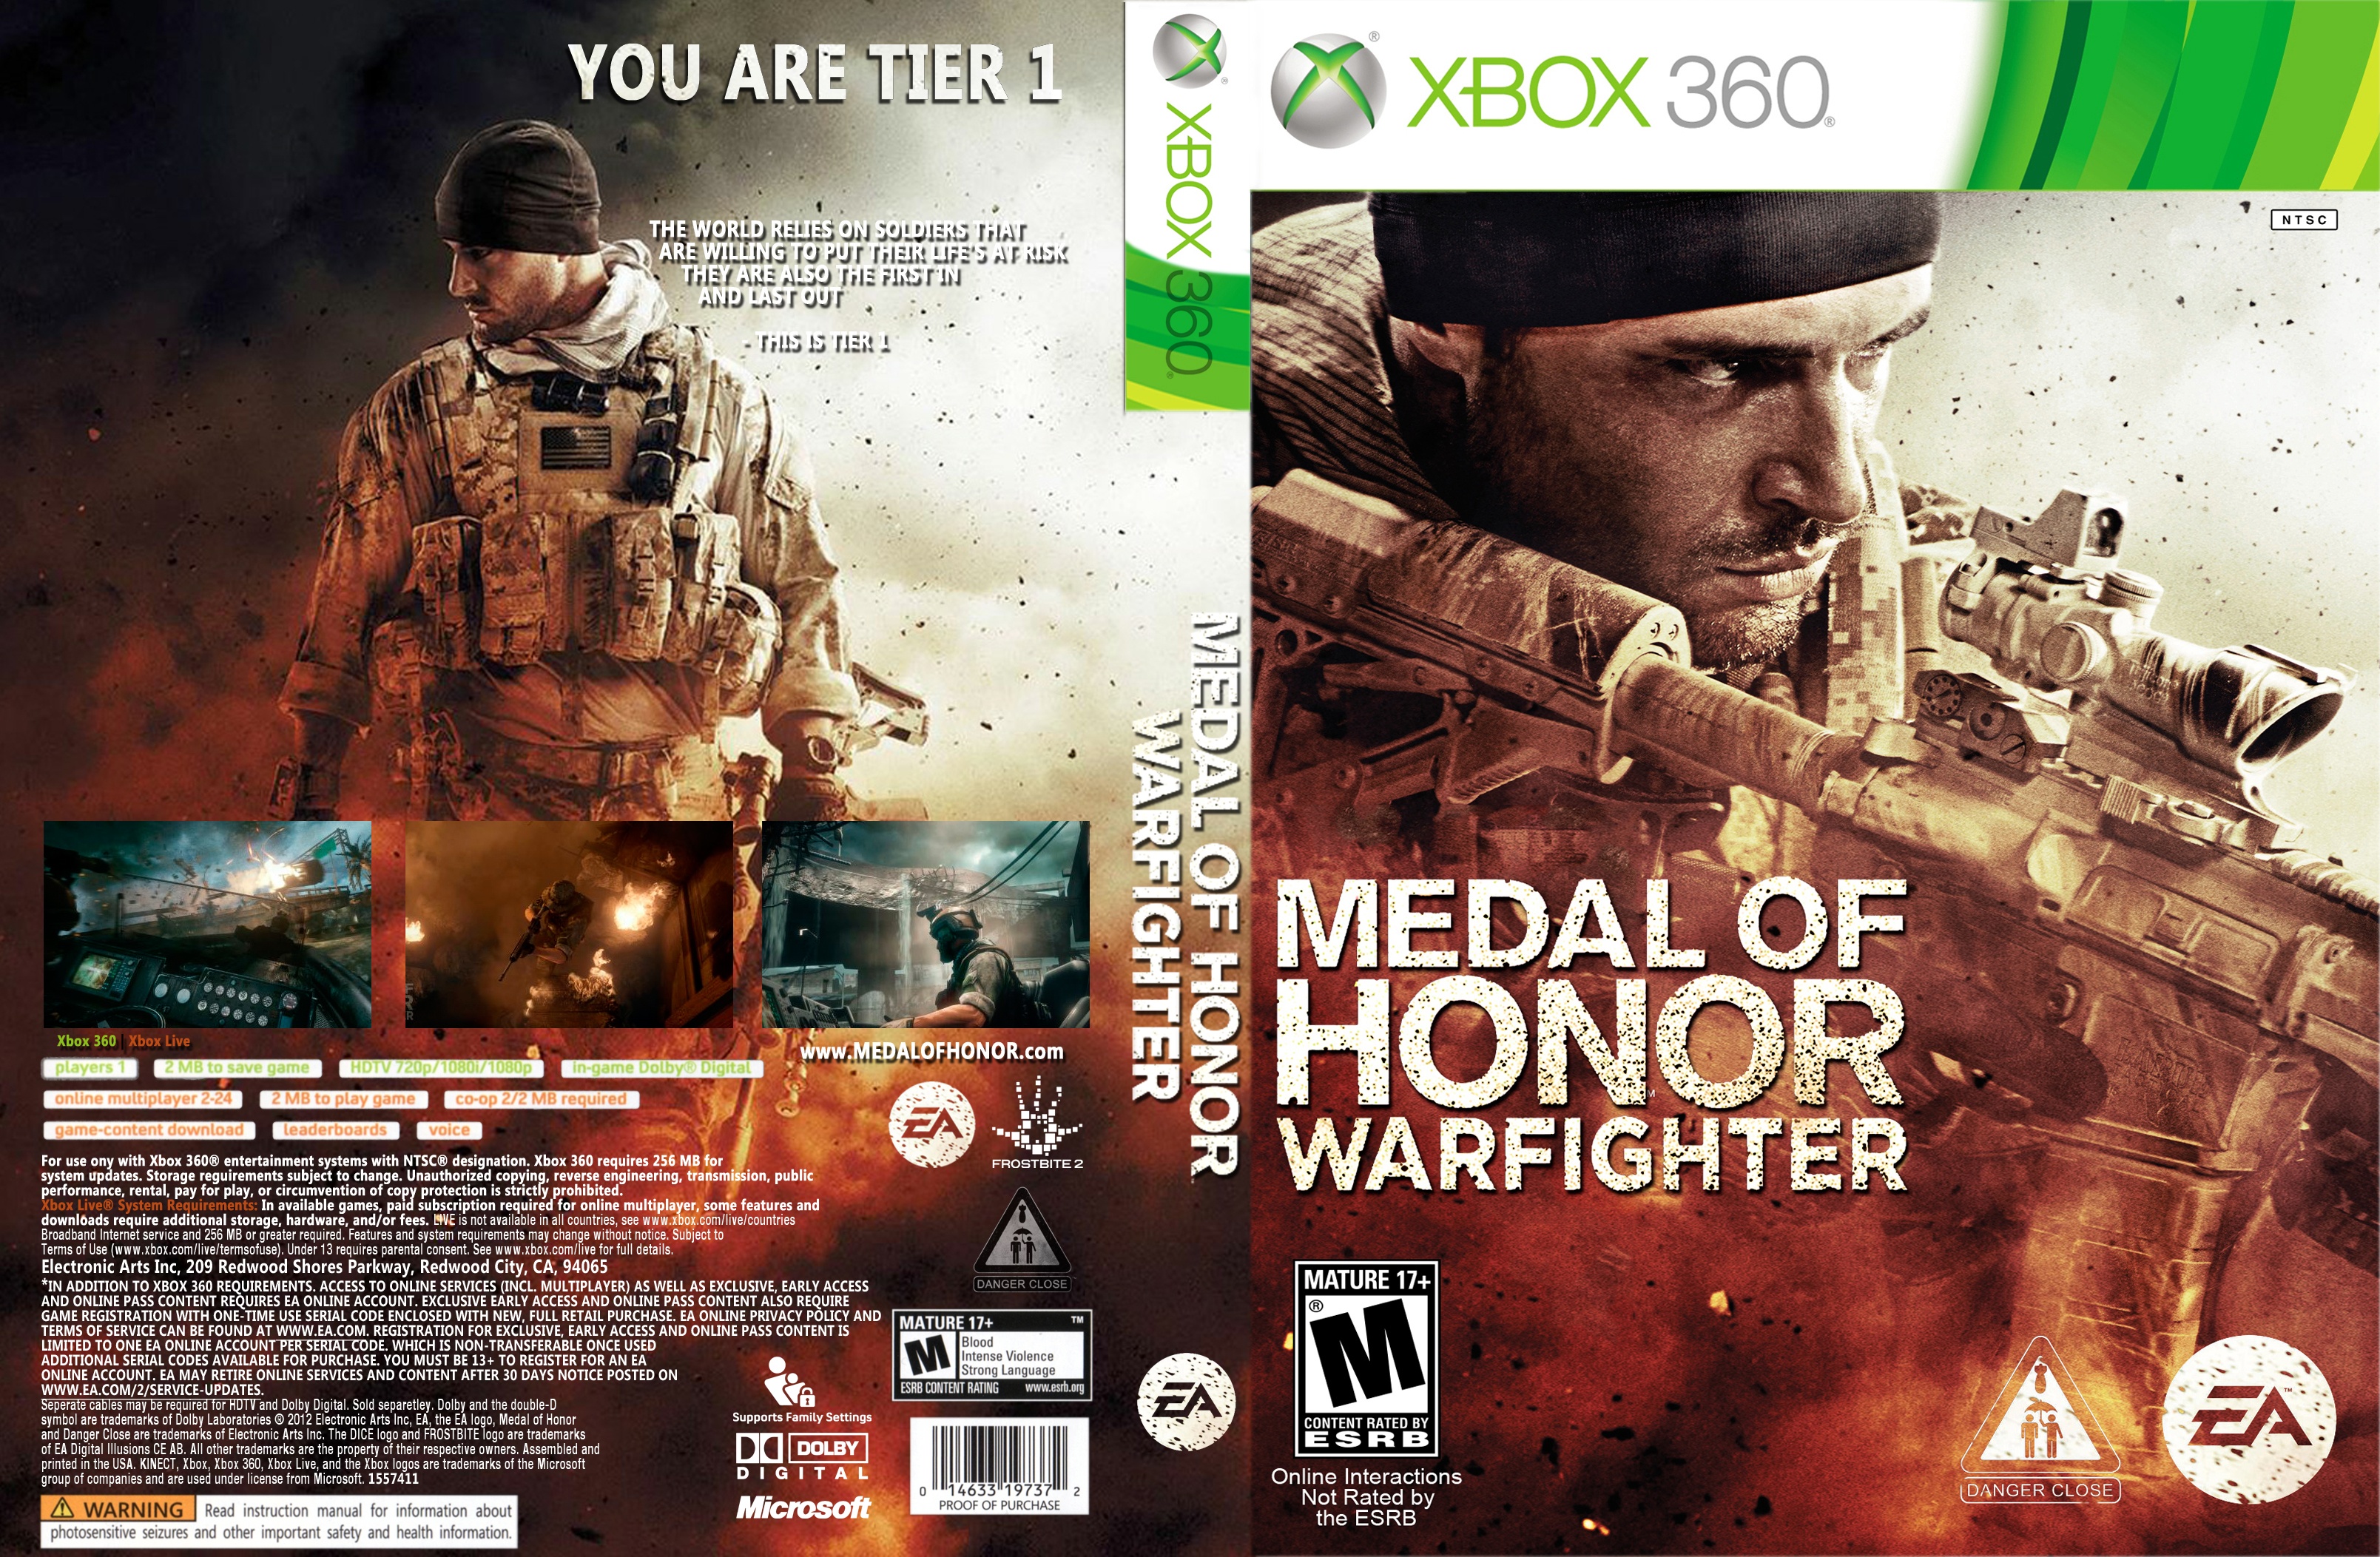 Medal of honor xbox 360. Medal of Honor Warfighter Xbox 360. Medal of Honor Warfighter Xbox 360 Disk. Medal of Honor: Warfighter Xbox 360 обложка. Medal of Honor 2012.